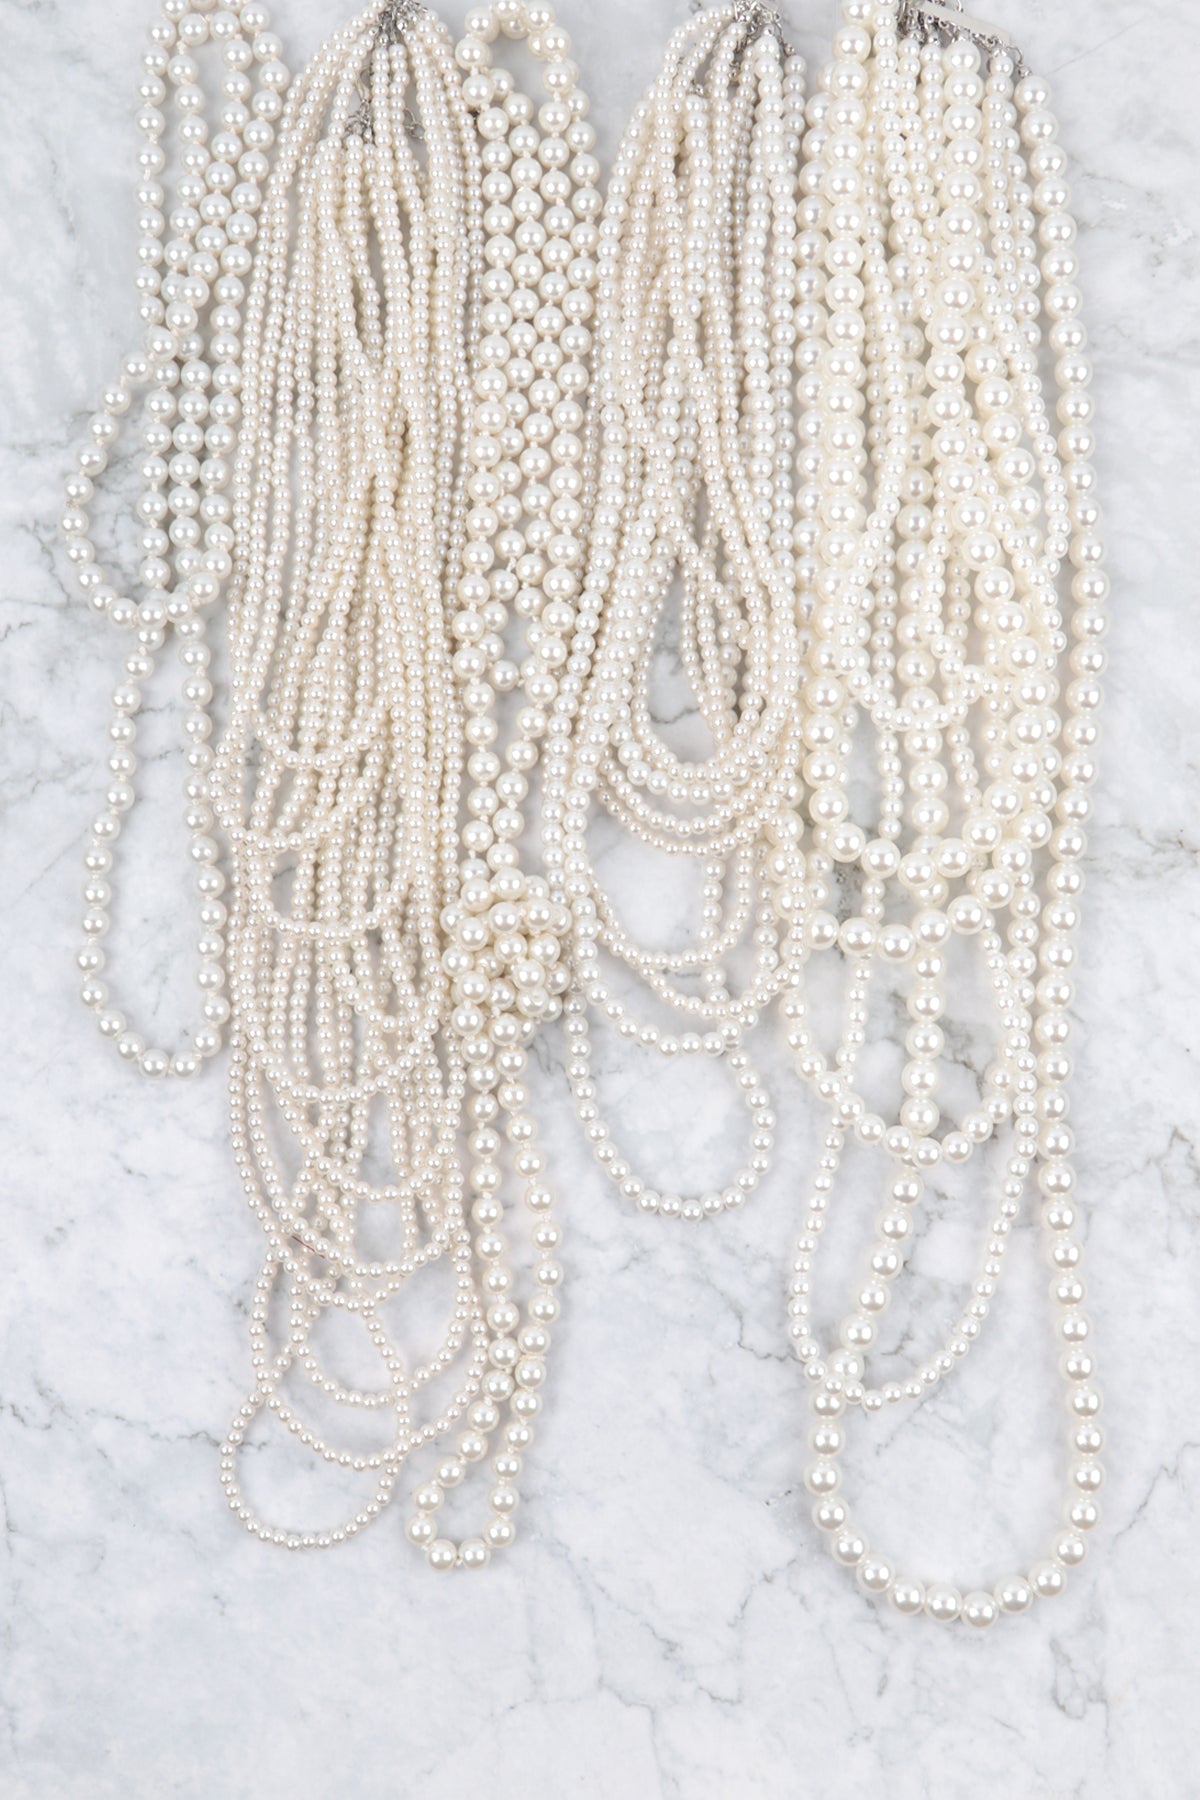 MULTI LAYER PEARL BEADS STATEMENT NECKLACE-CREAM